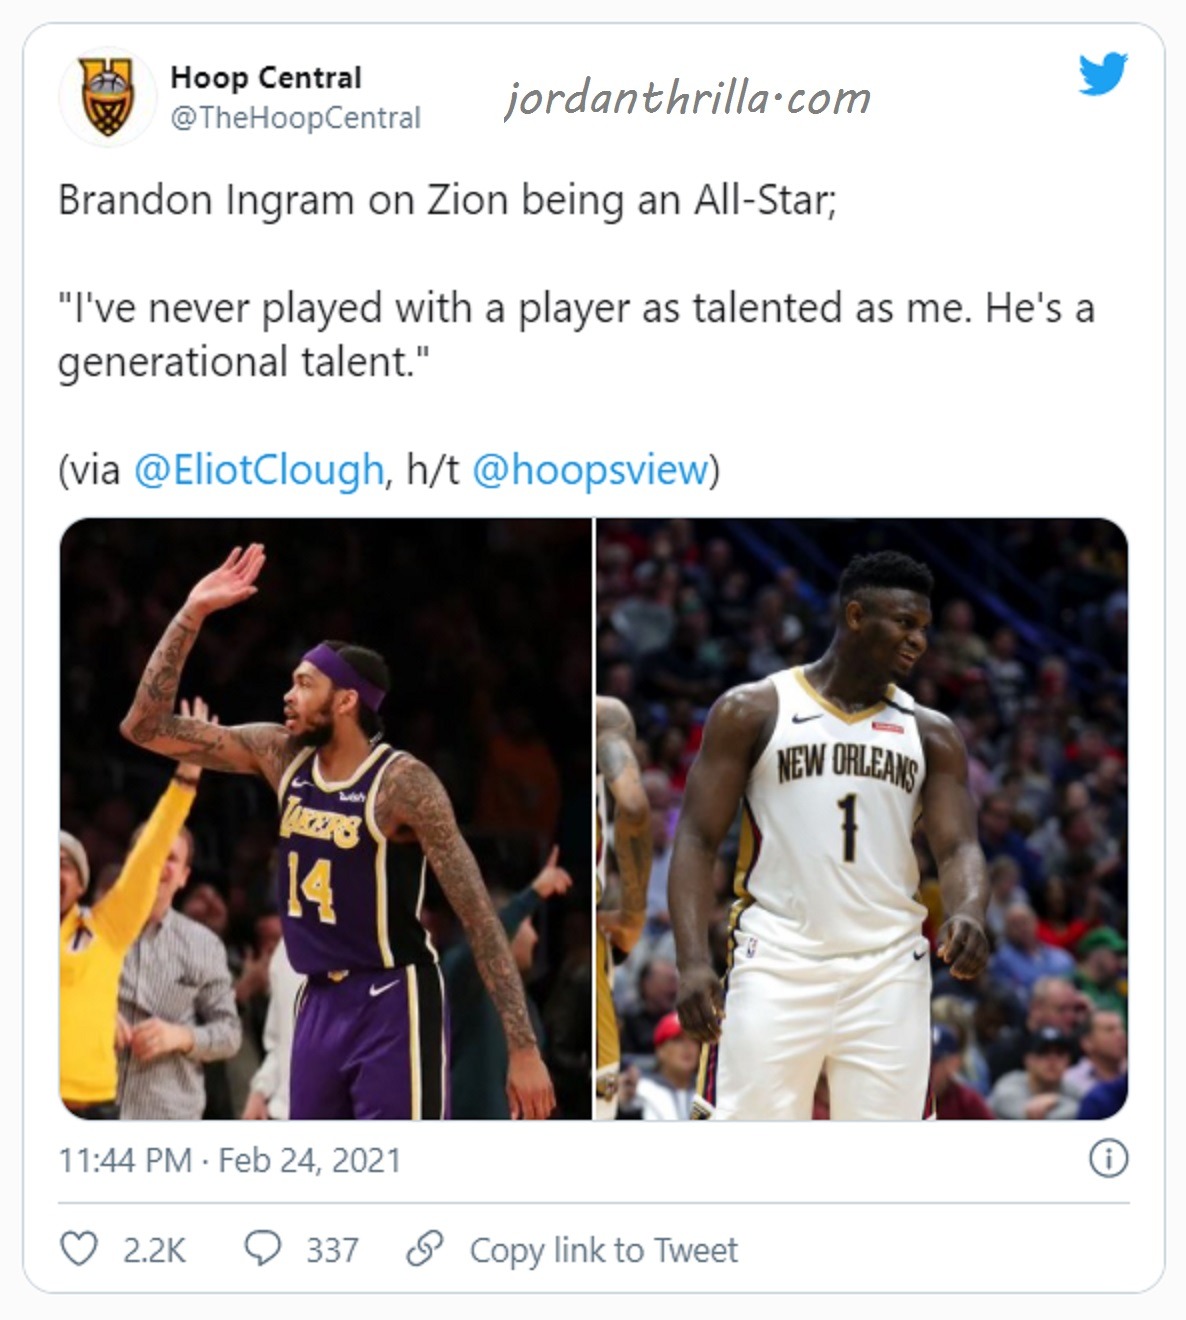 Brandon Ingram dissing Lebron James in reaction to Zion Williamson's All Star selection